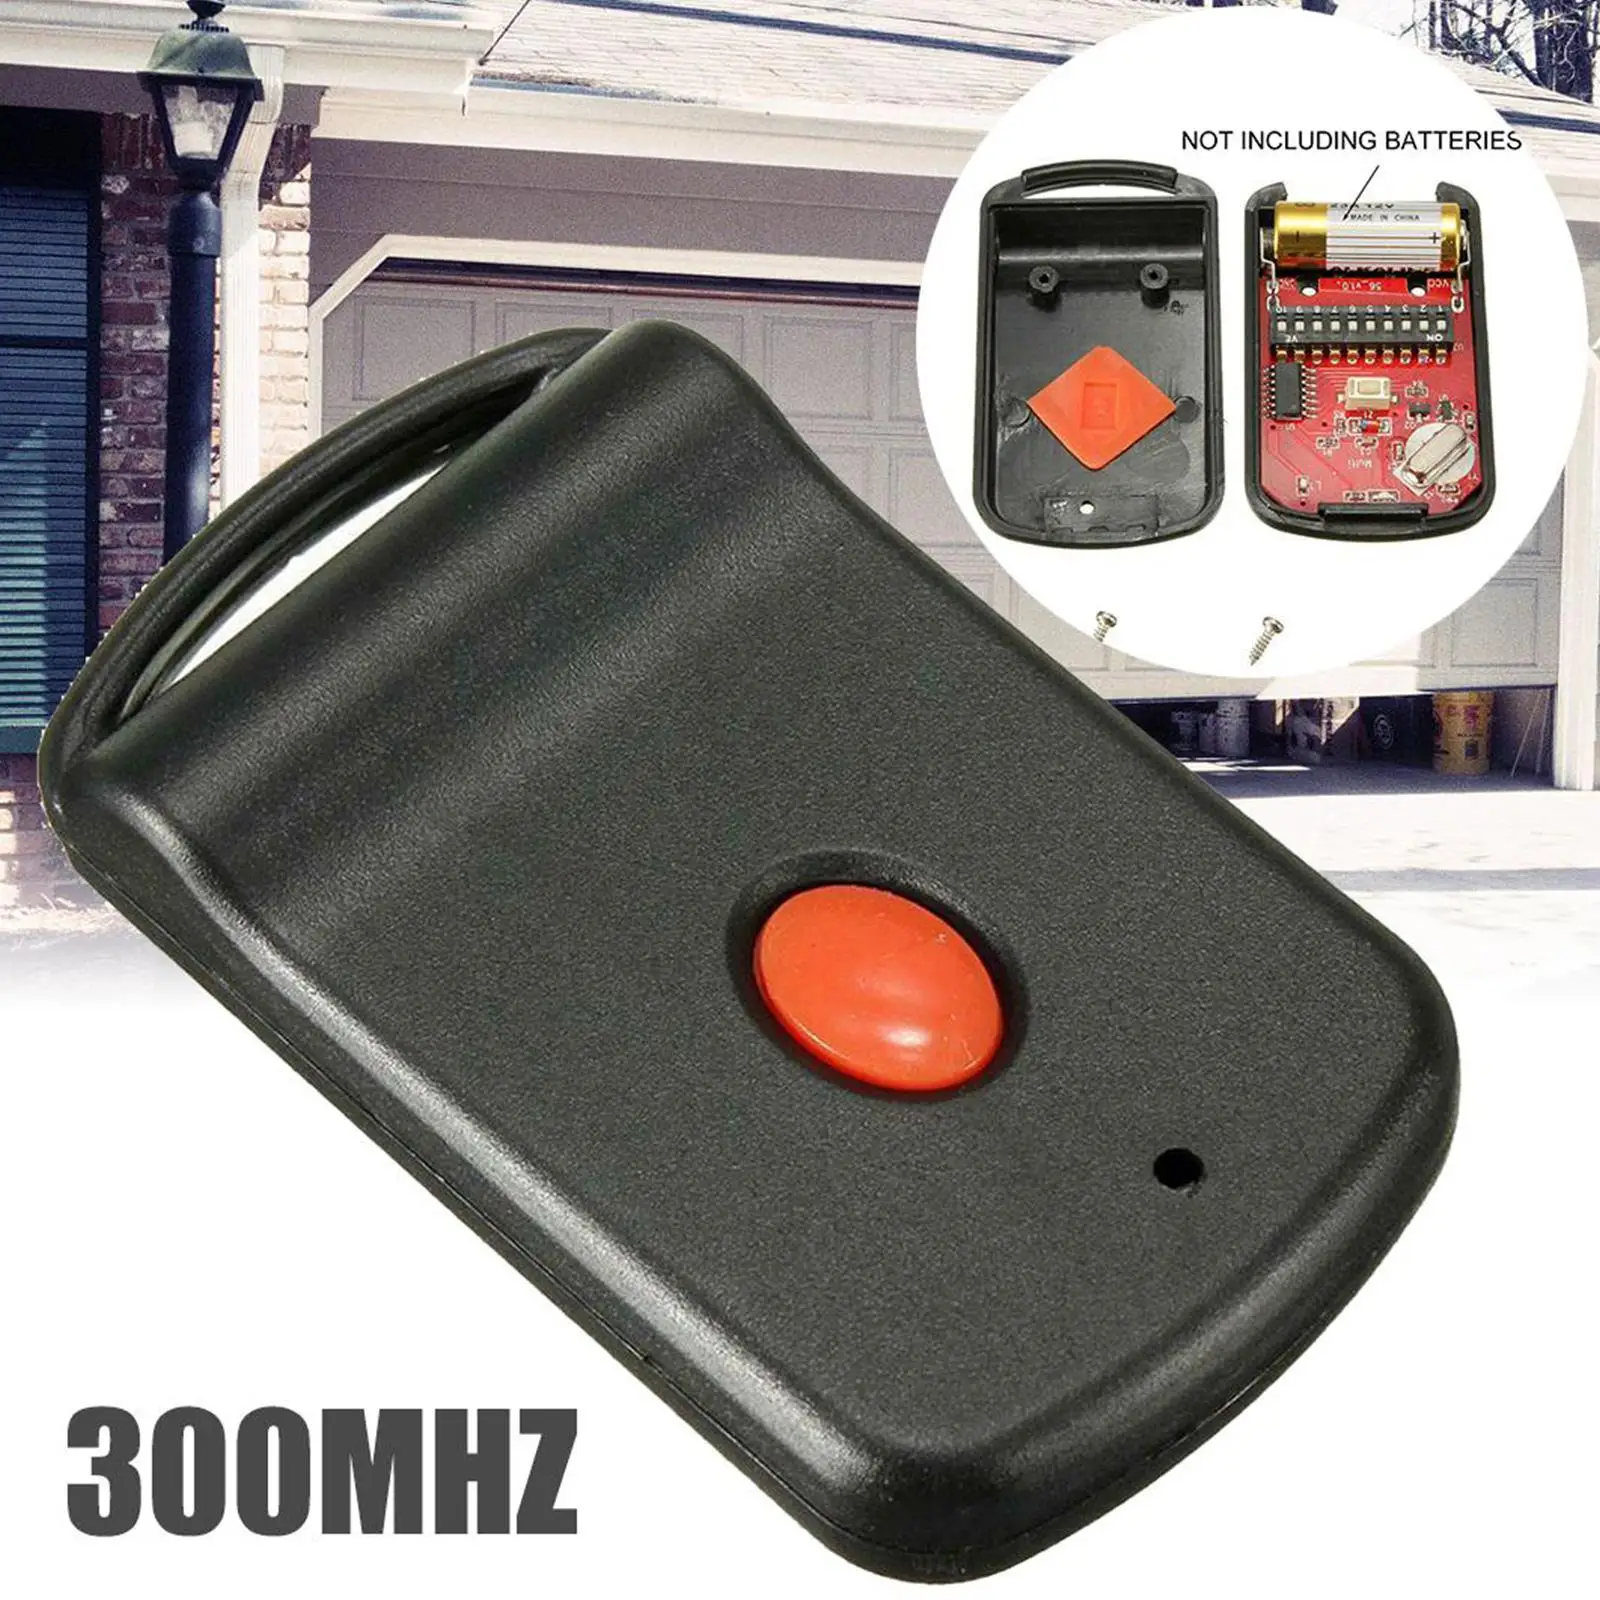 

Wireless Remote Control For Remote Garage Door Transmission 300MHz 10 DIP Switch Remote Control For Multi Code 1089 3089 41 Y7K7